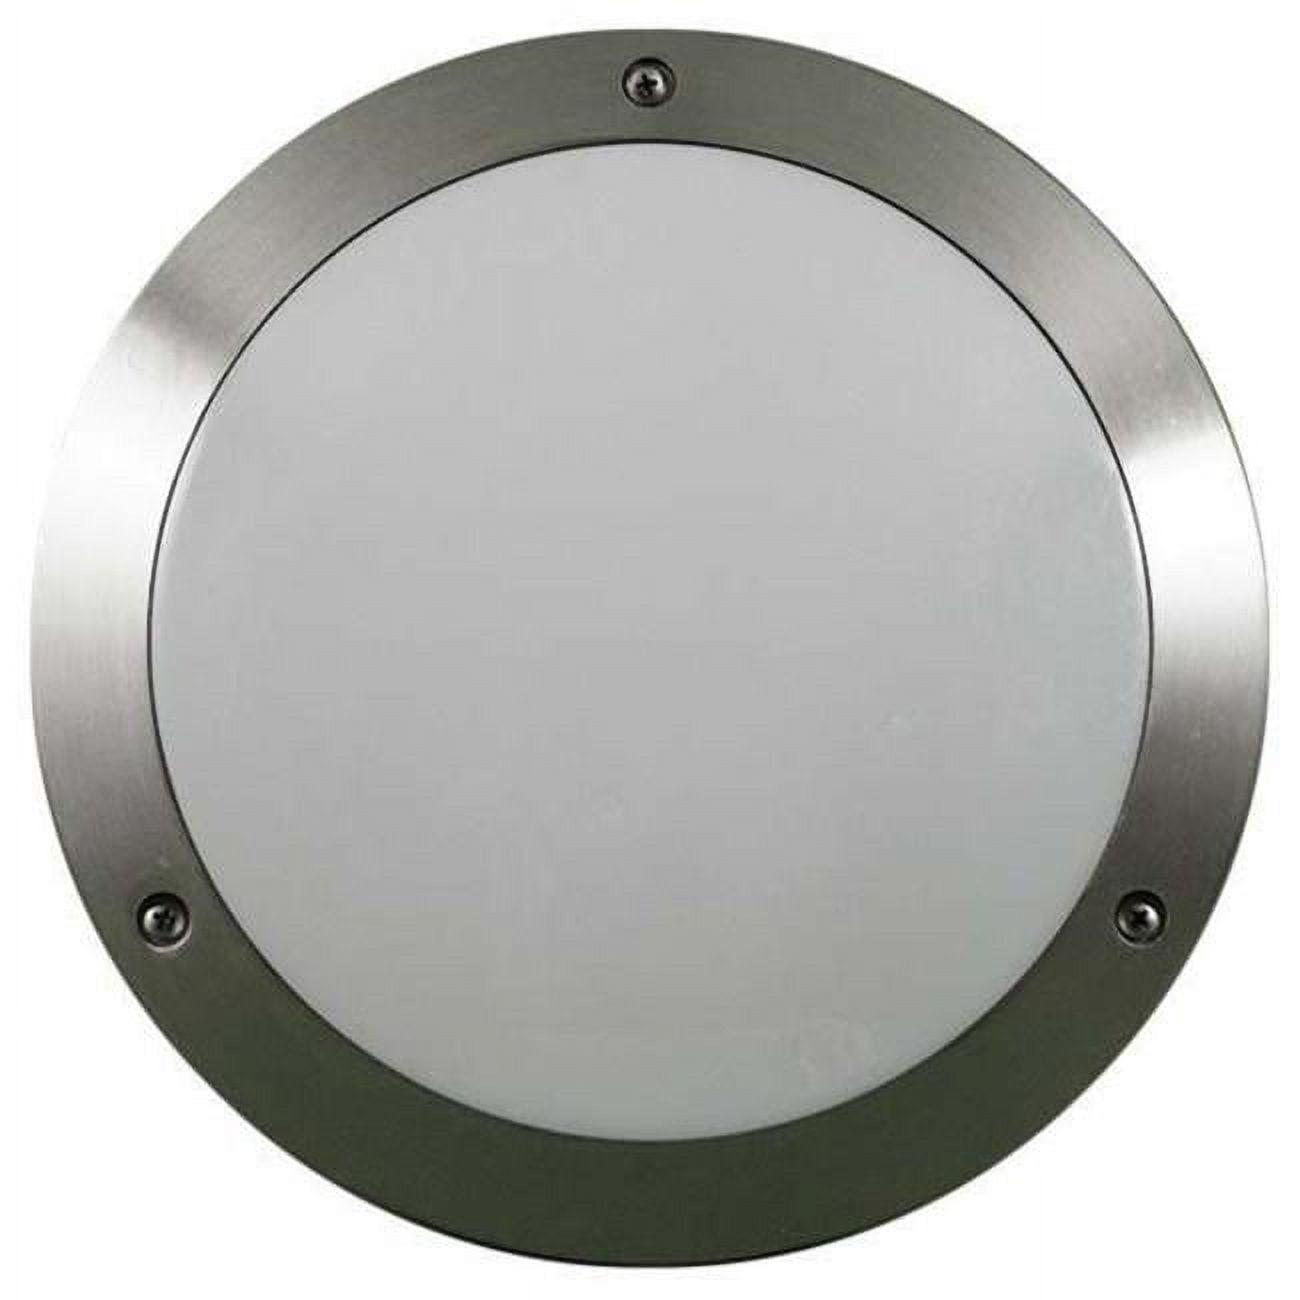 Picture of Dabmar Lighting W3983-GRY Surface Mounted Wall Fixture - 26W 120V